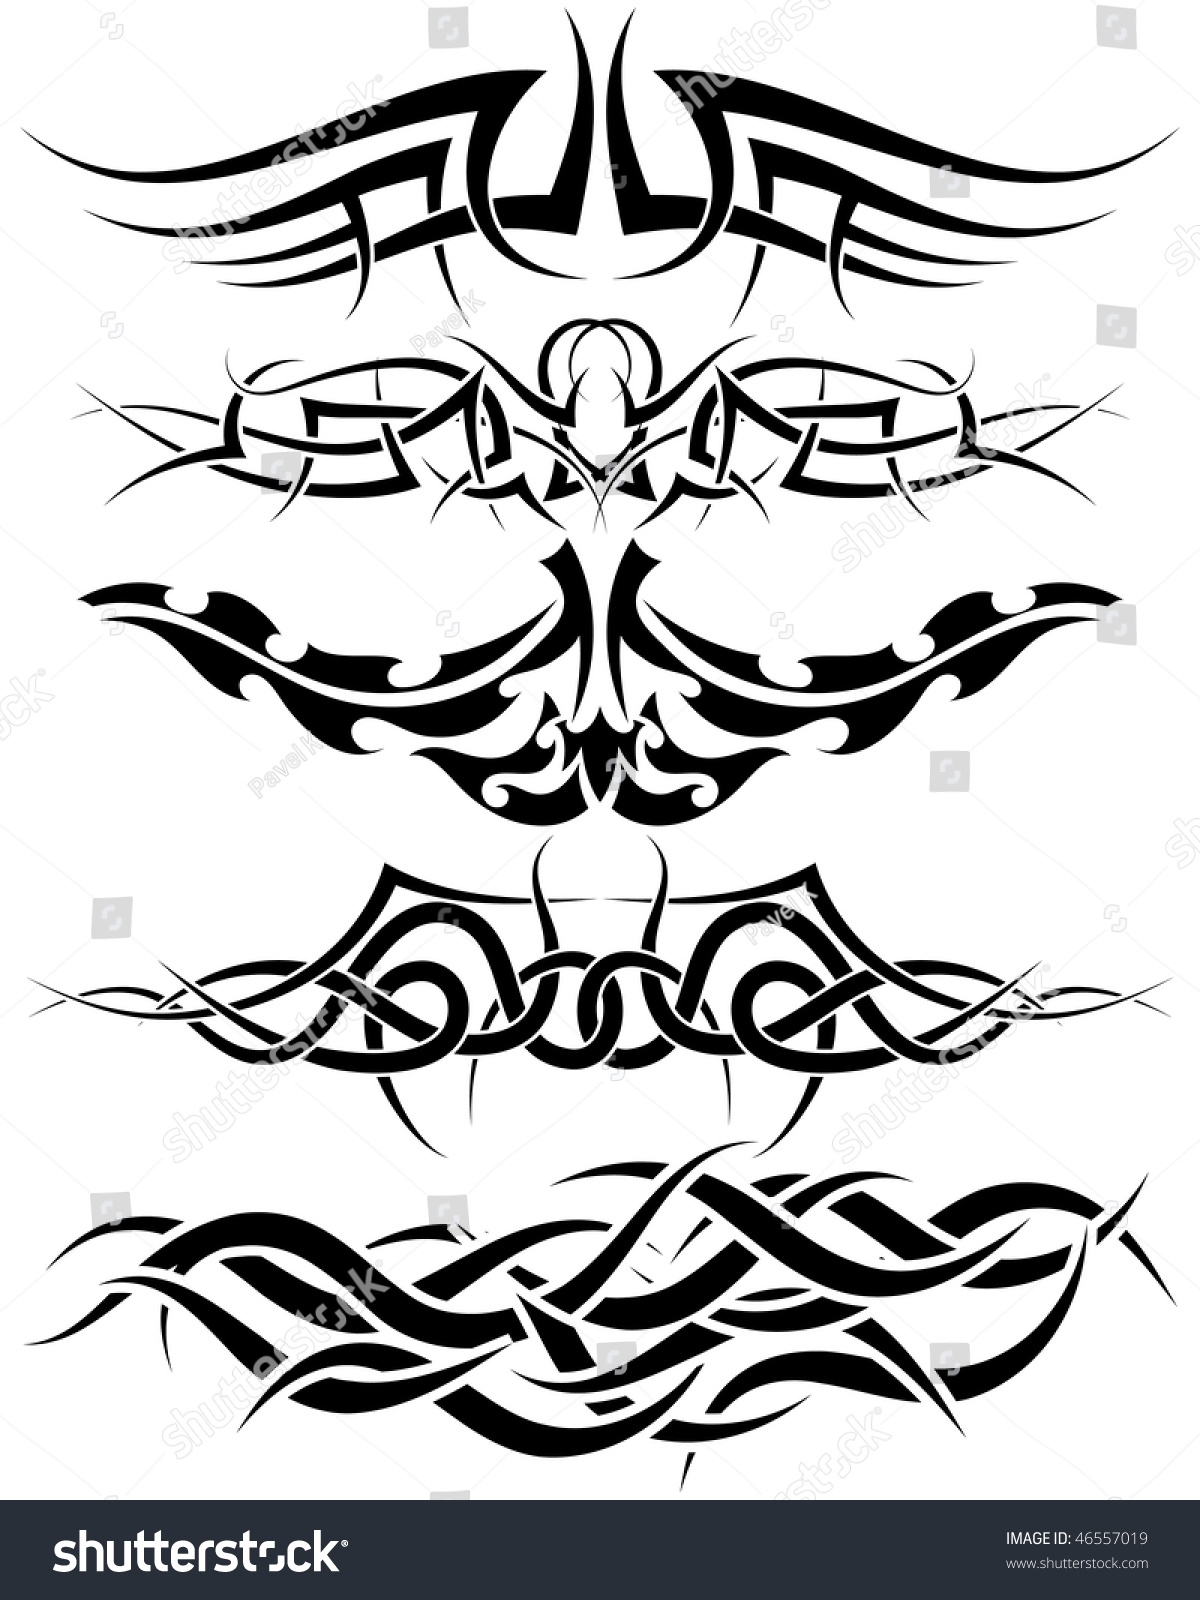 Patterns Of Tribal Tattoo For Design Use Stock Vector Illustration ...